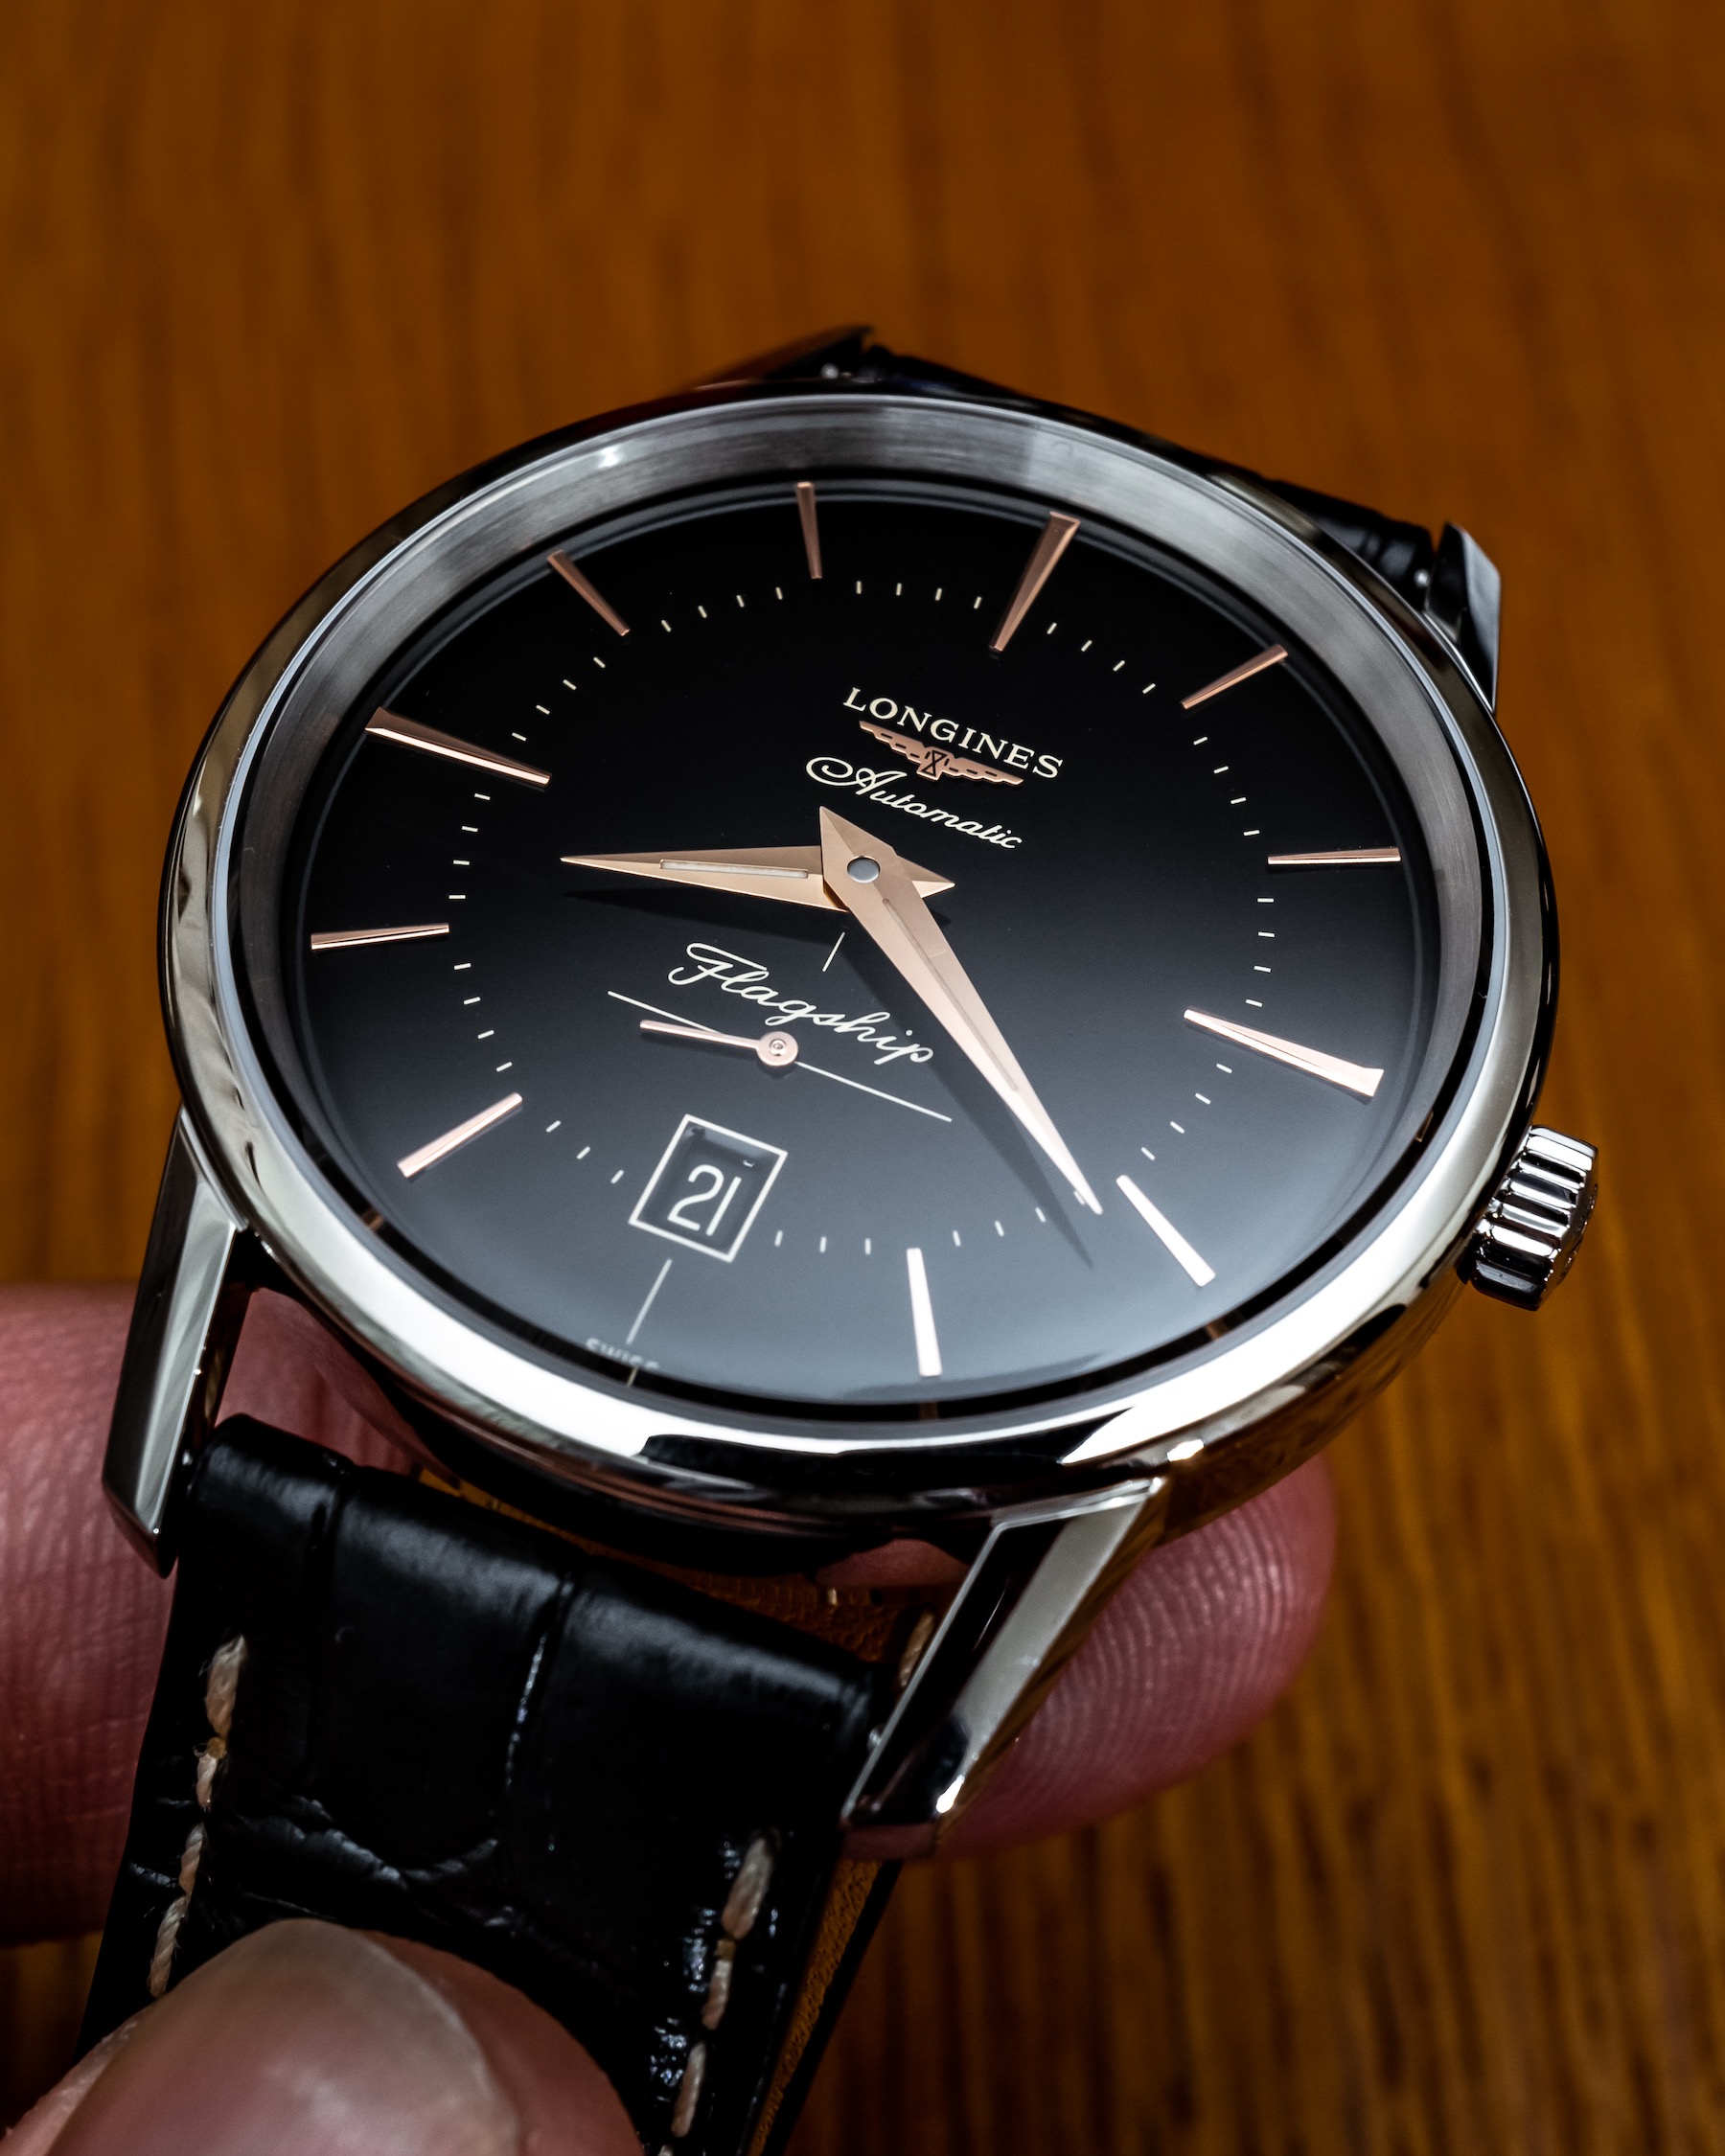 HandsOn Debut Longines Flagship Heritage Watch In Black Dial